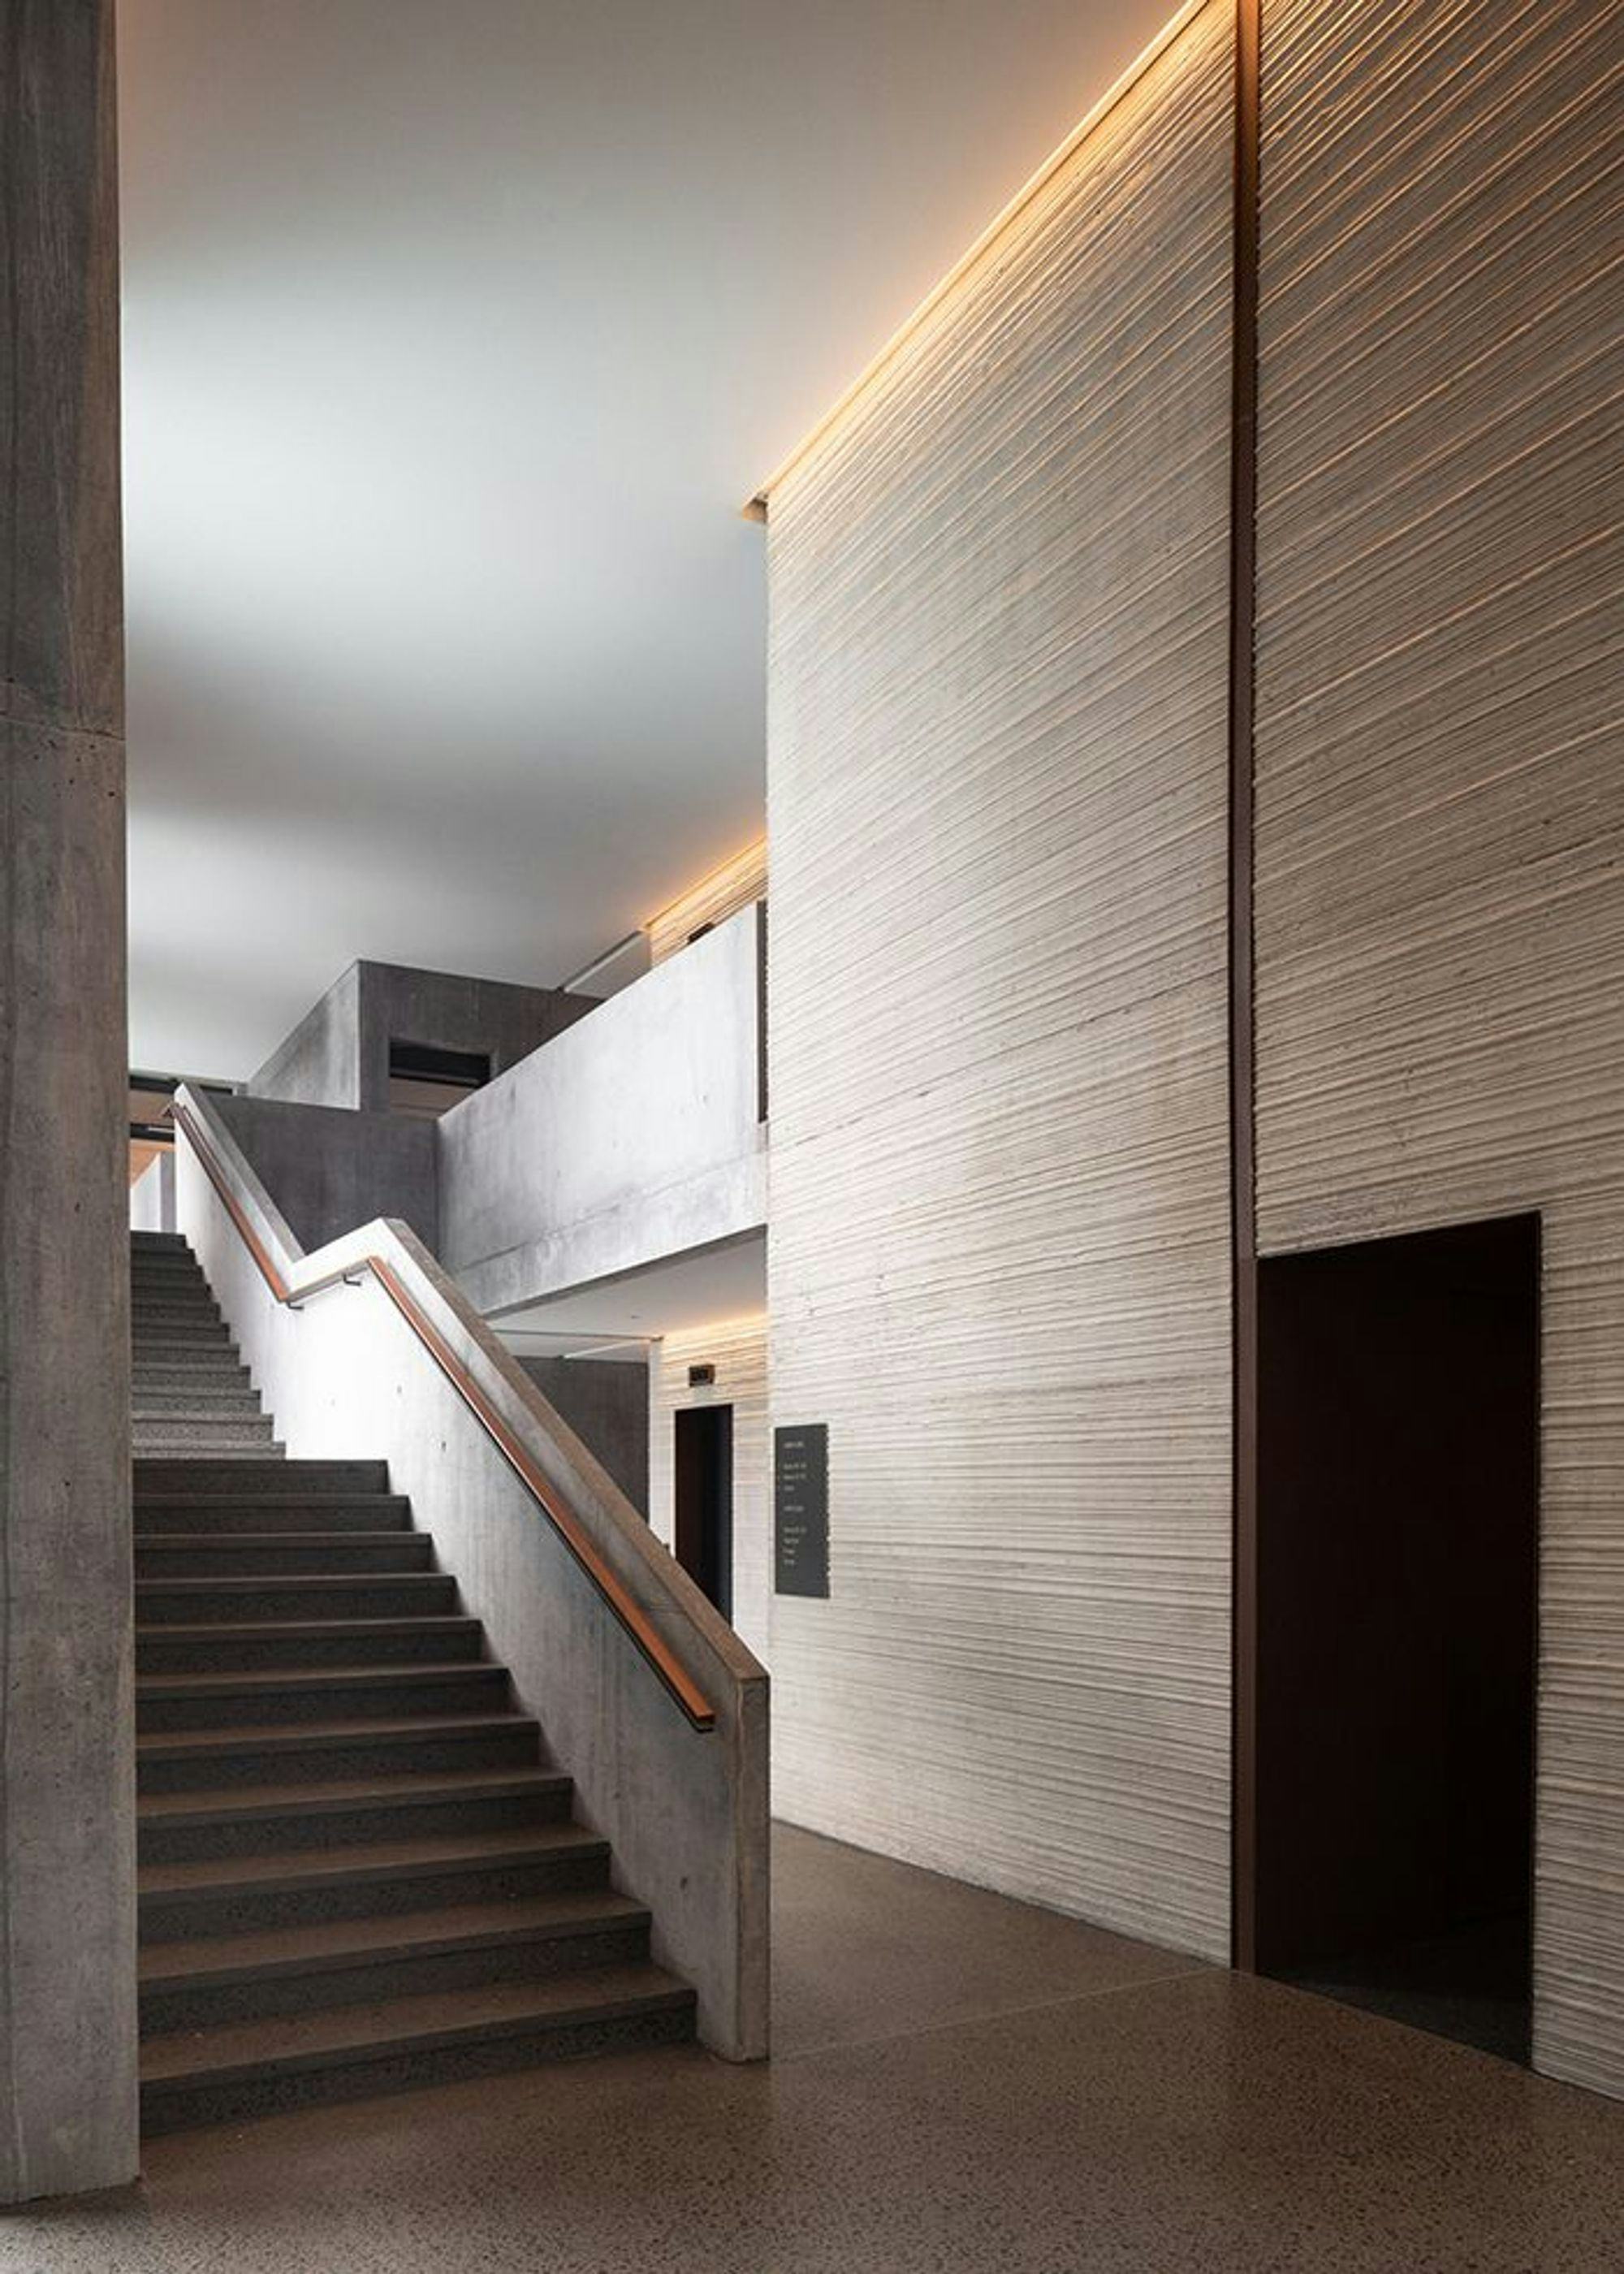 Staircase of a modern building with minimalistic interior